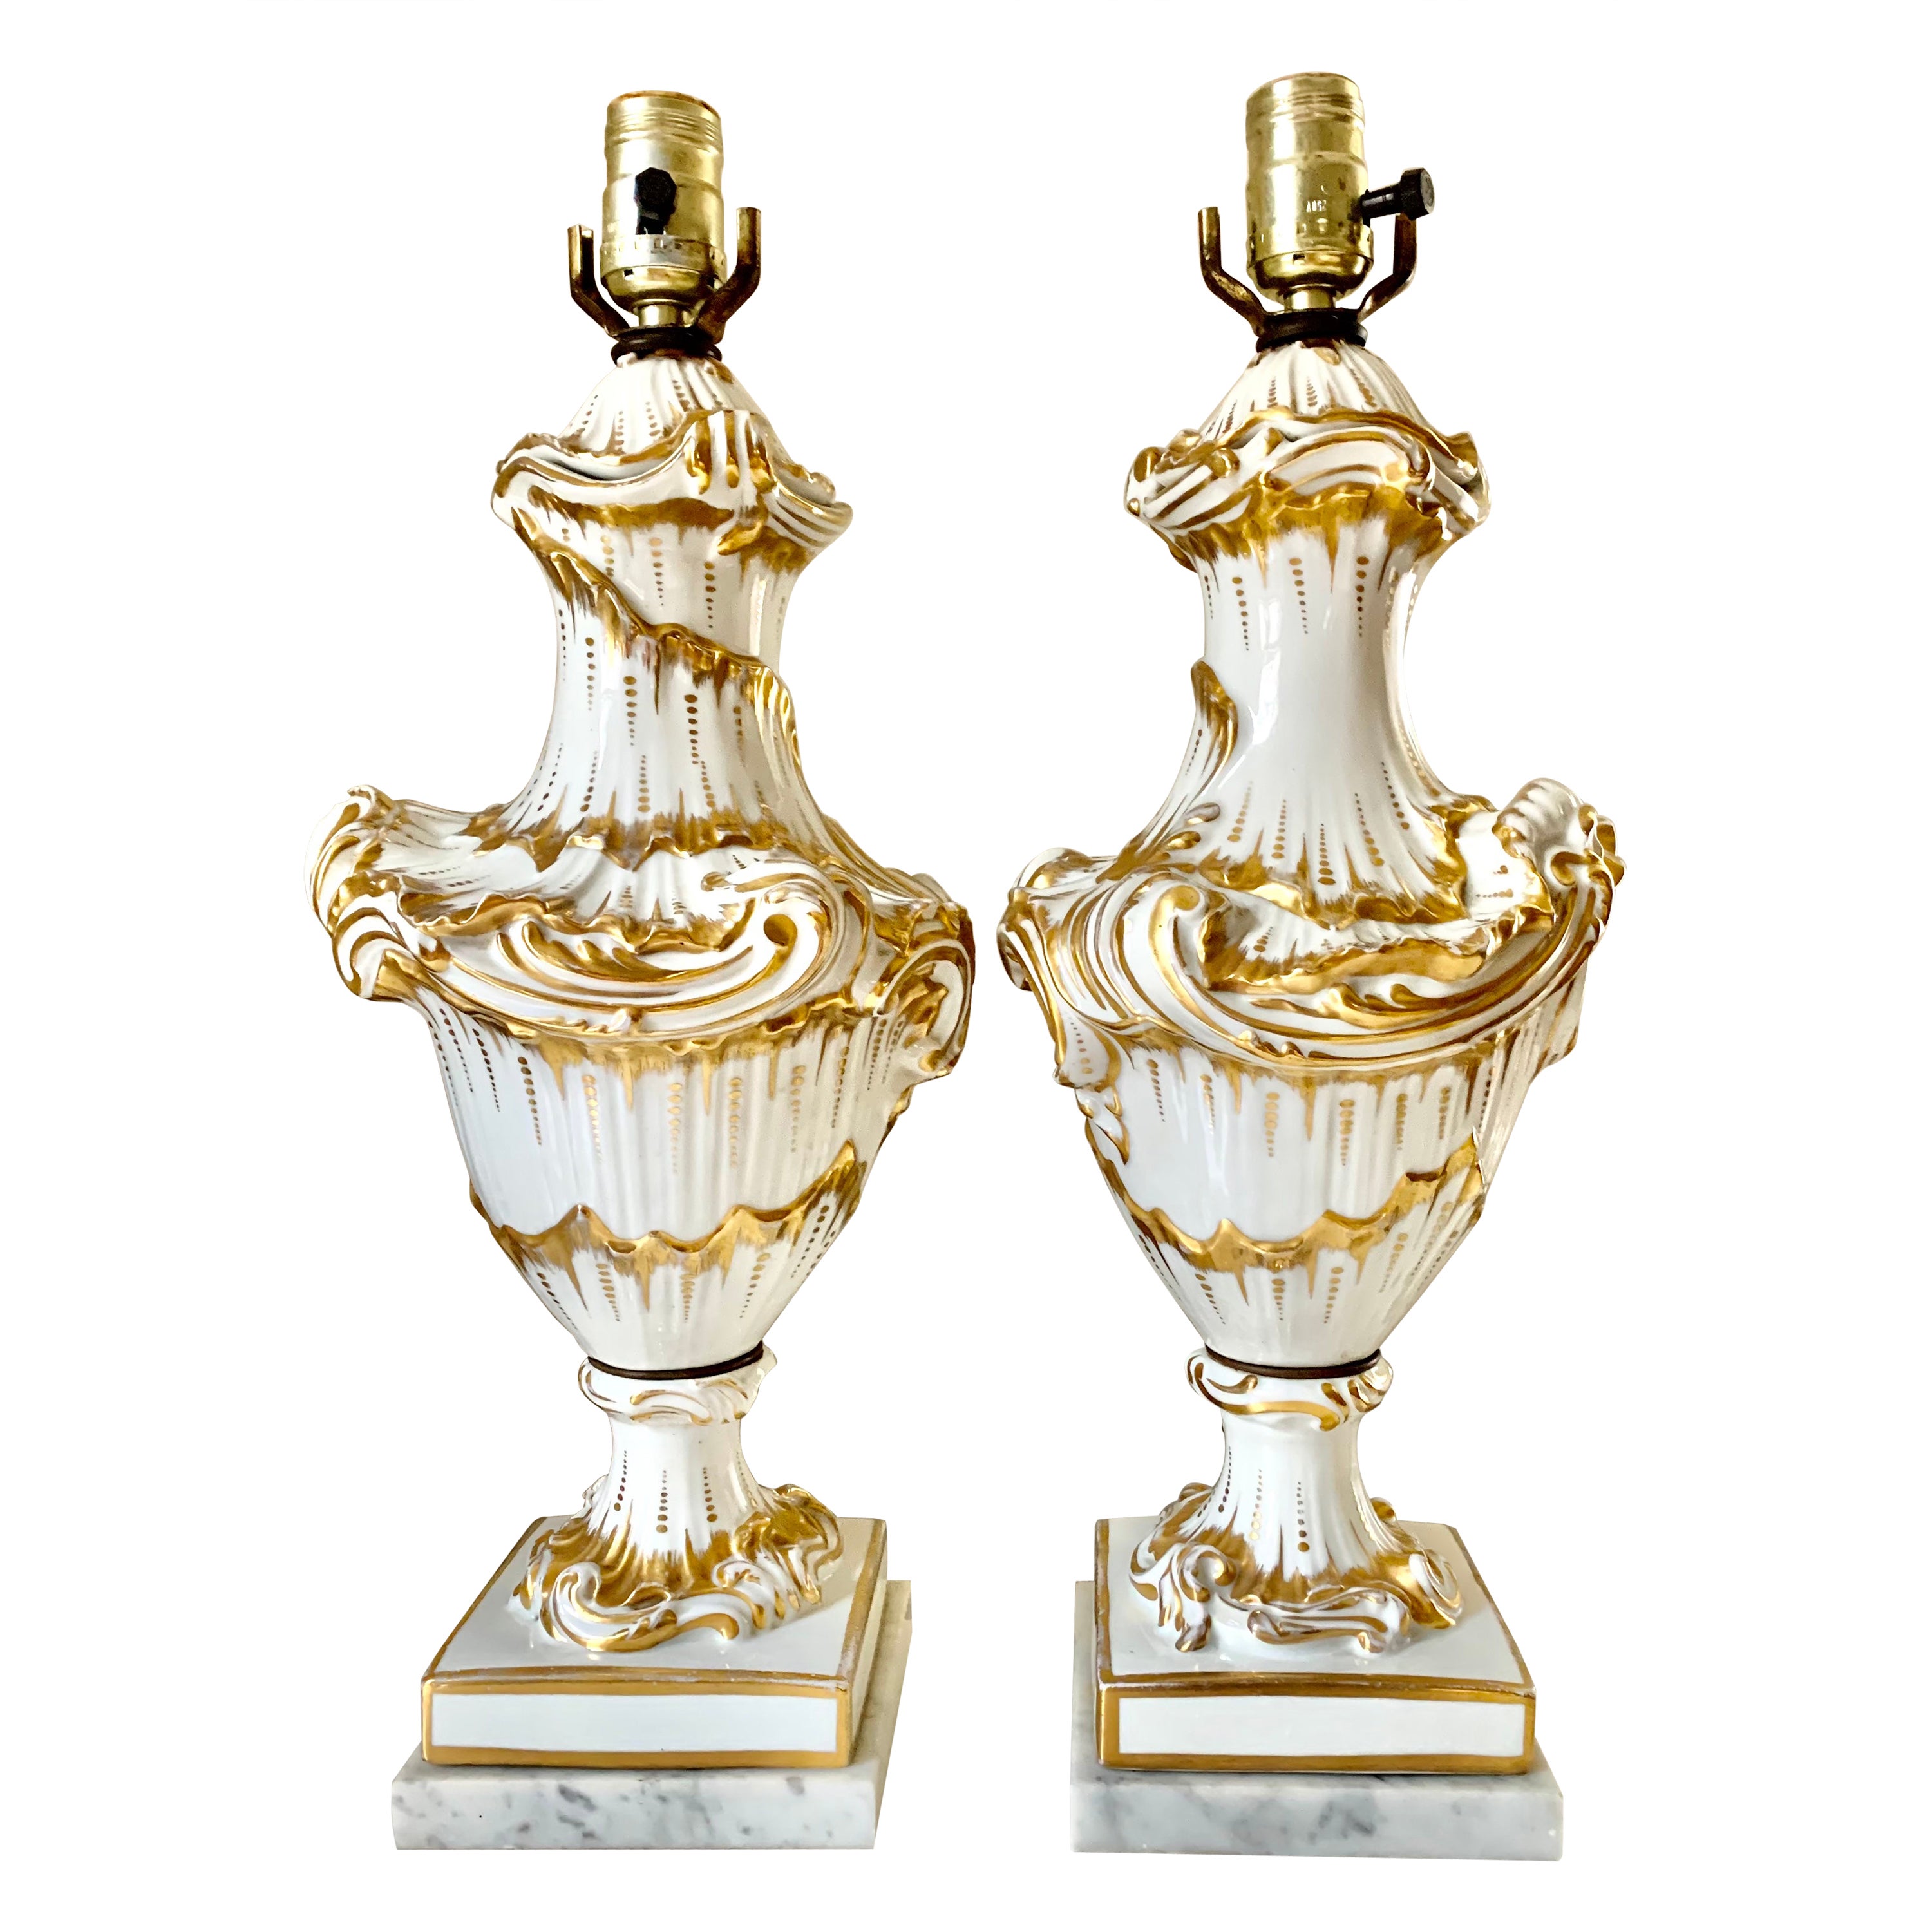 Fine Pair Rococo Style White and Gold Porcelain Table Lamps, 19th Century